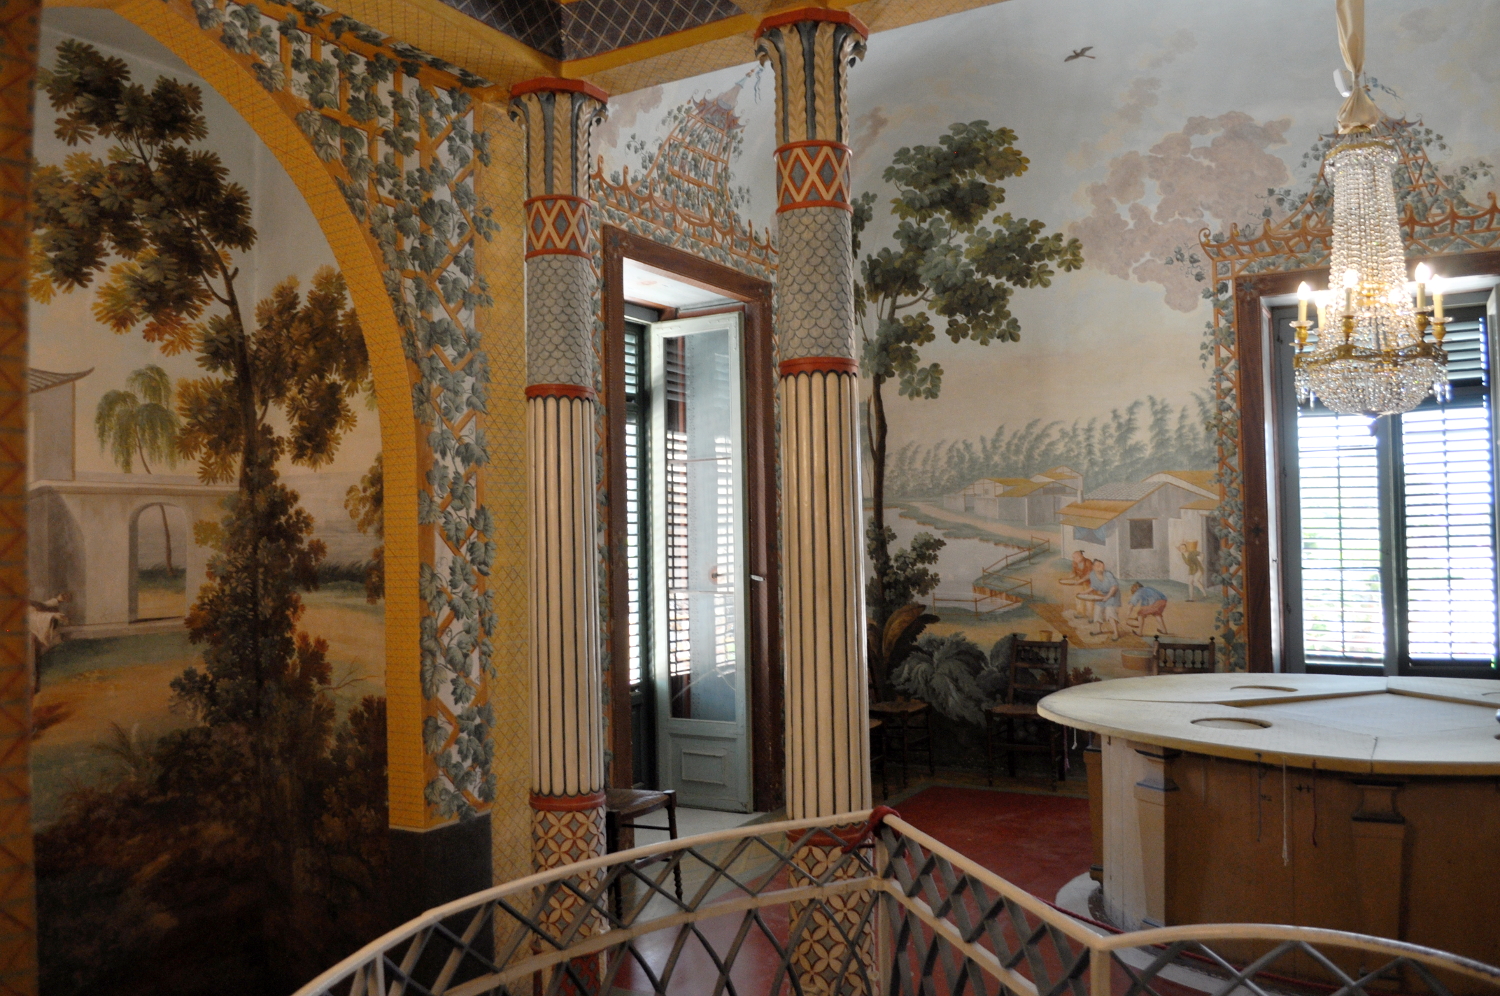 rocaille-blog-palazzina-cinese-palermo-8